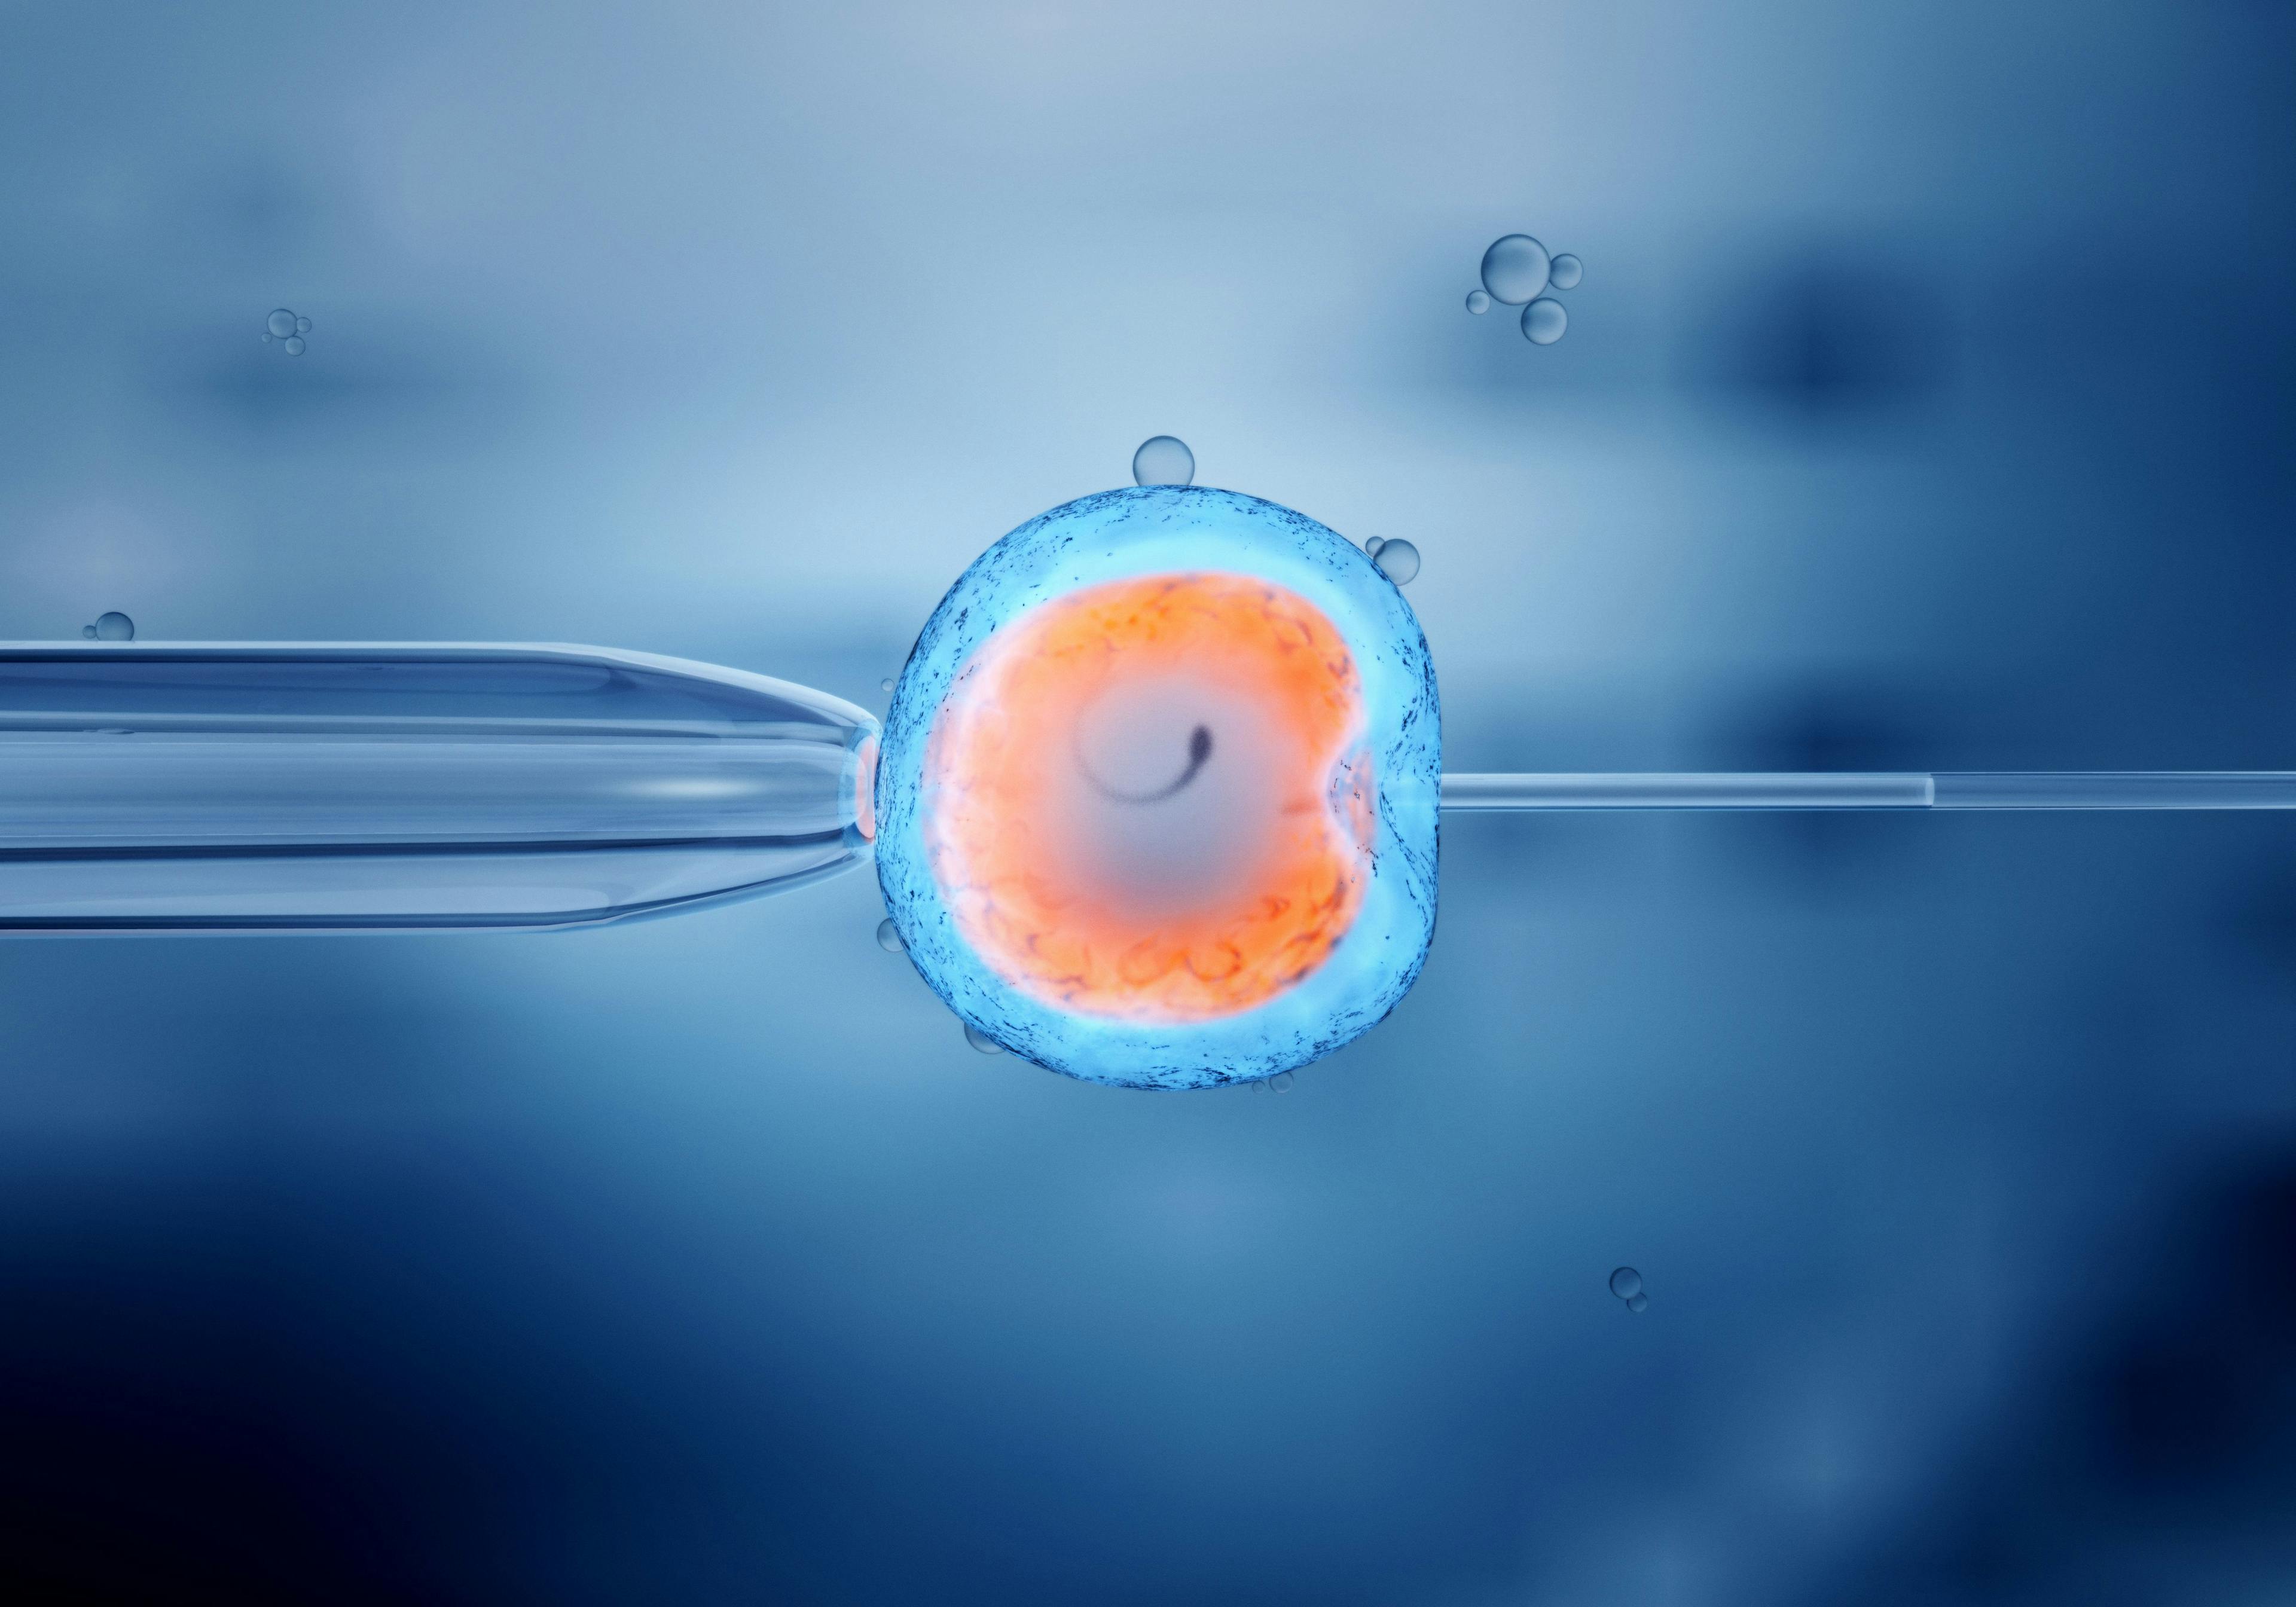 SART data indicates rise in IVF use in 2022 | Image Credit: © Christoph Burgstedt - © Christoph Burgstedt - stock.adobe.com.